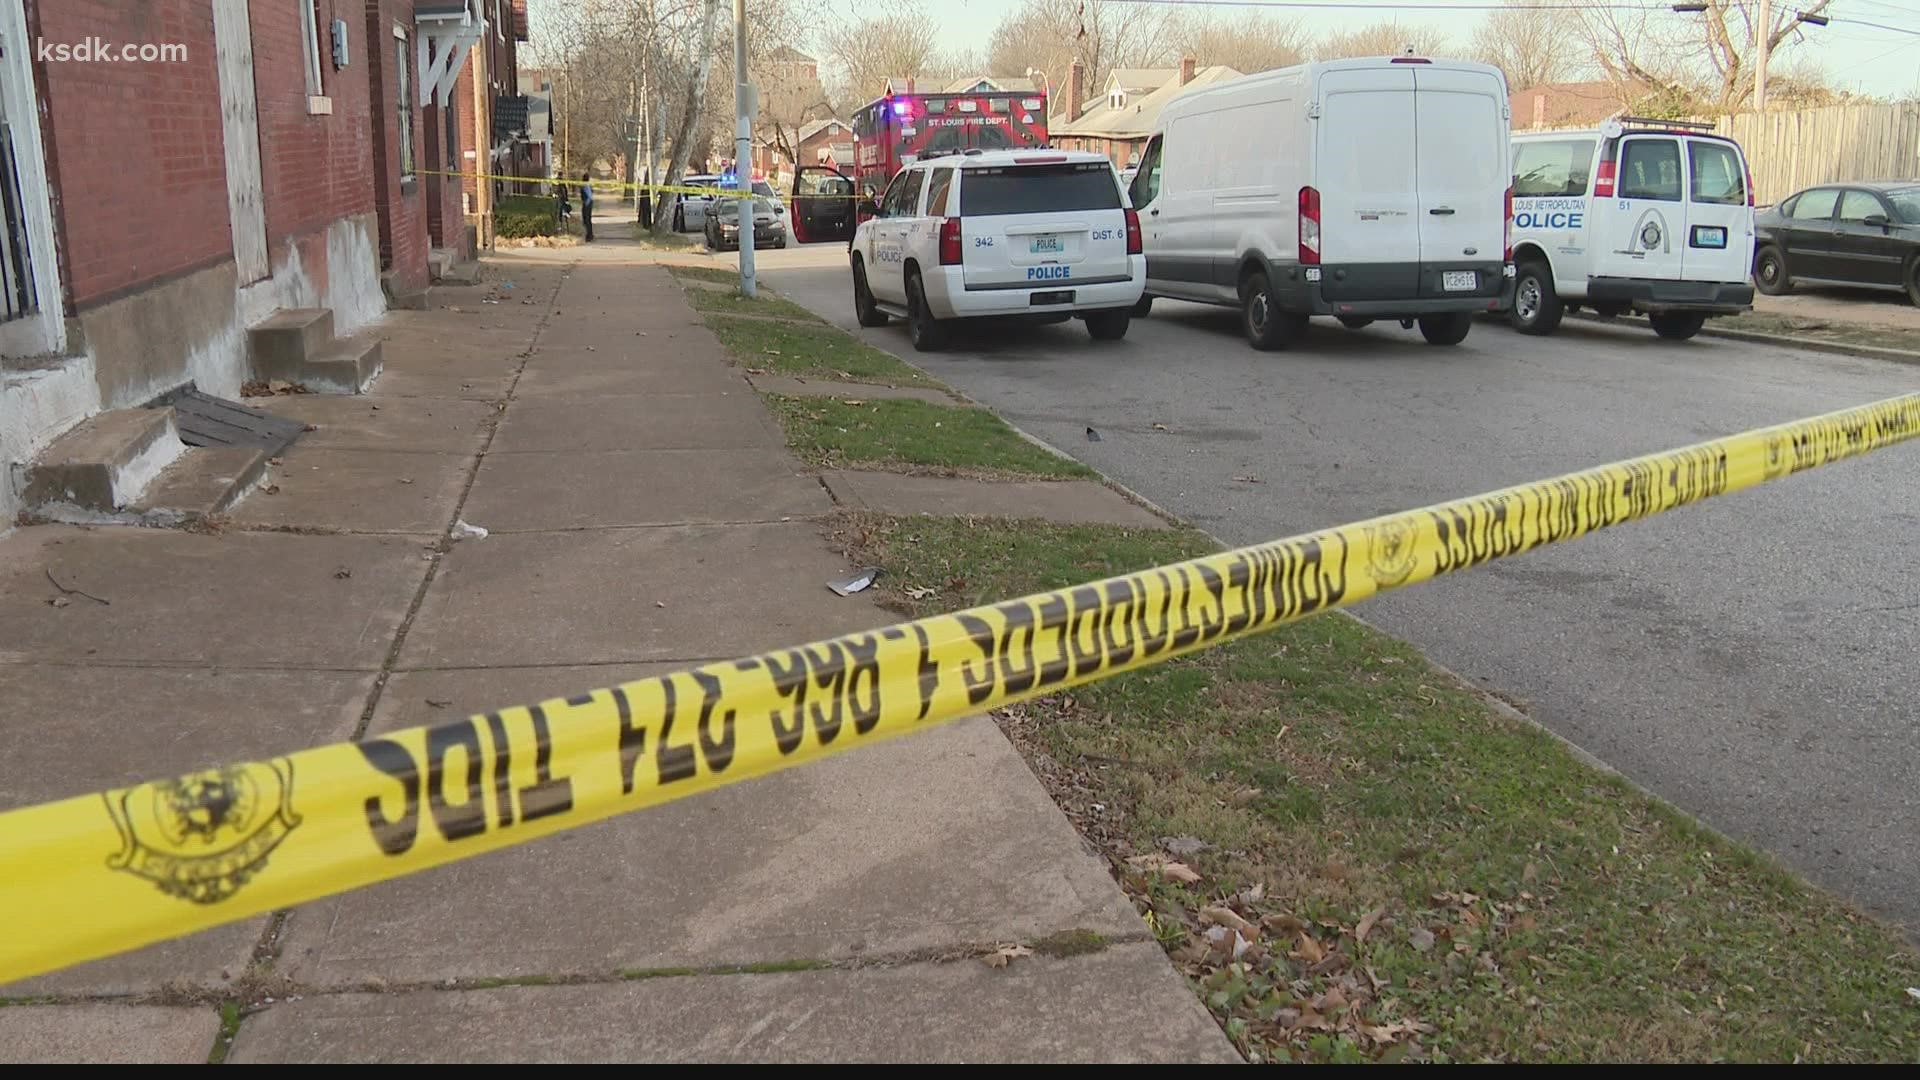 Detectives with the SLMPD's homicide division are handling the ongoing investigation.